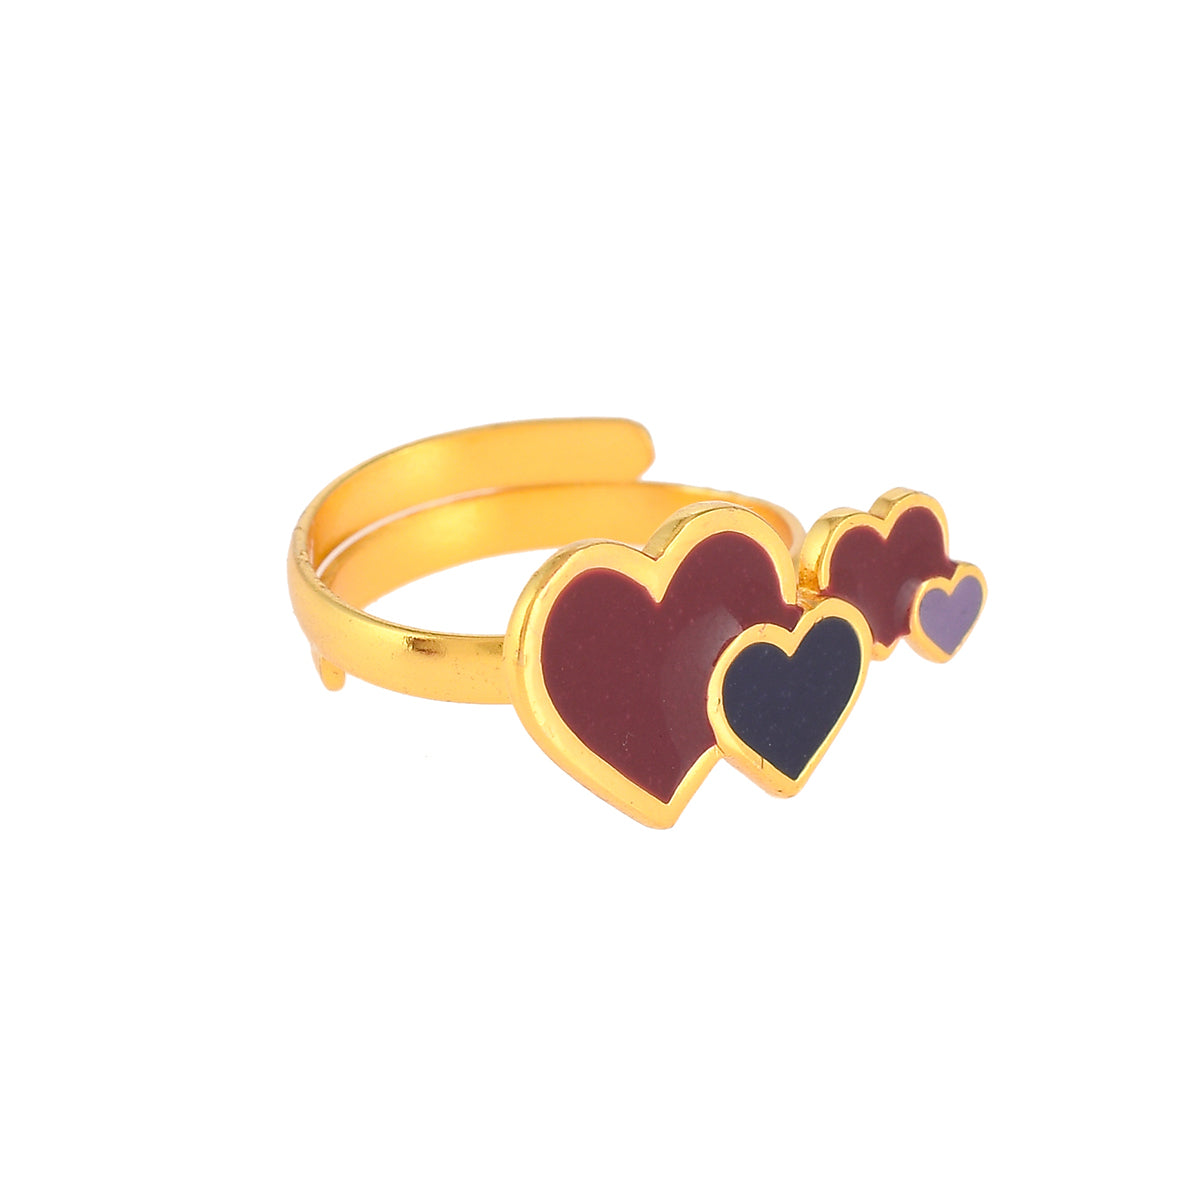 Enamelled Hearts Ring